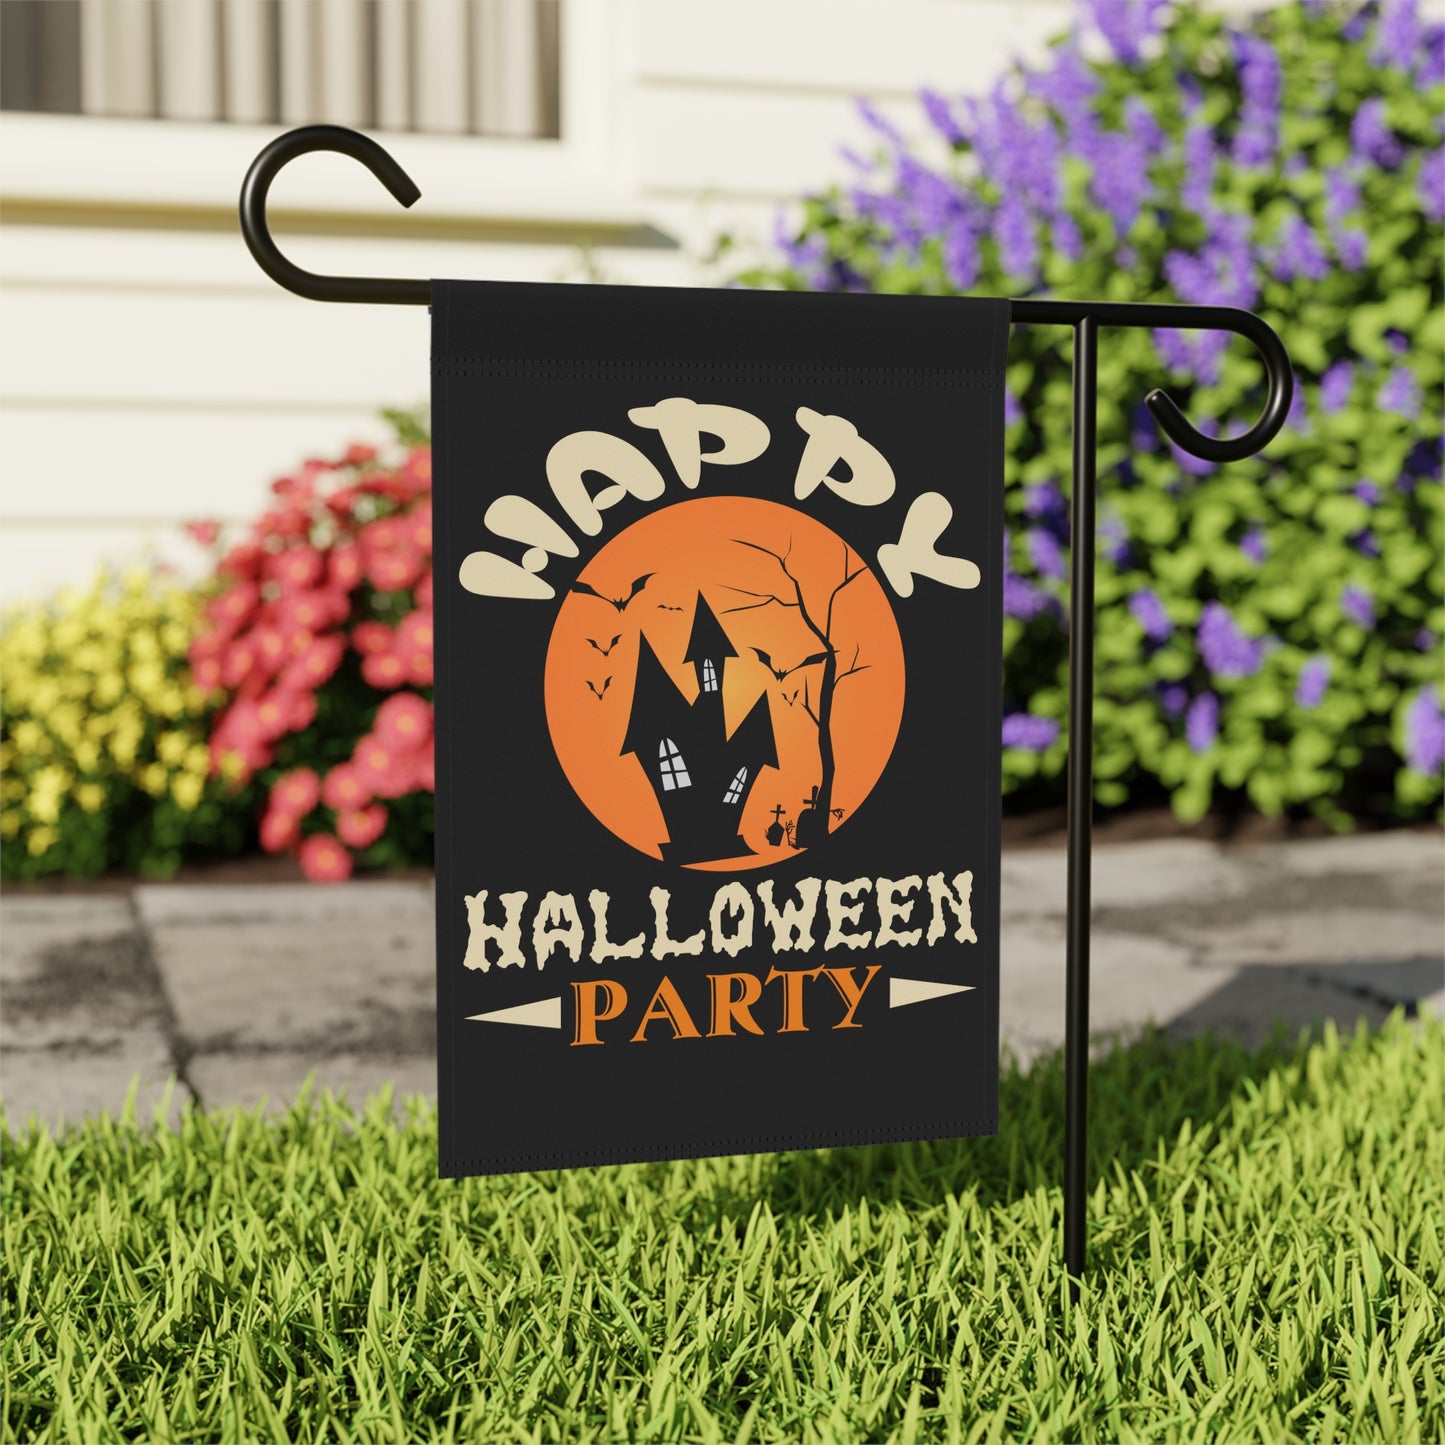 Happy Halloween Party Banner To Let the Ghouls Know Where It's At